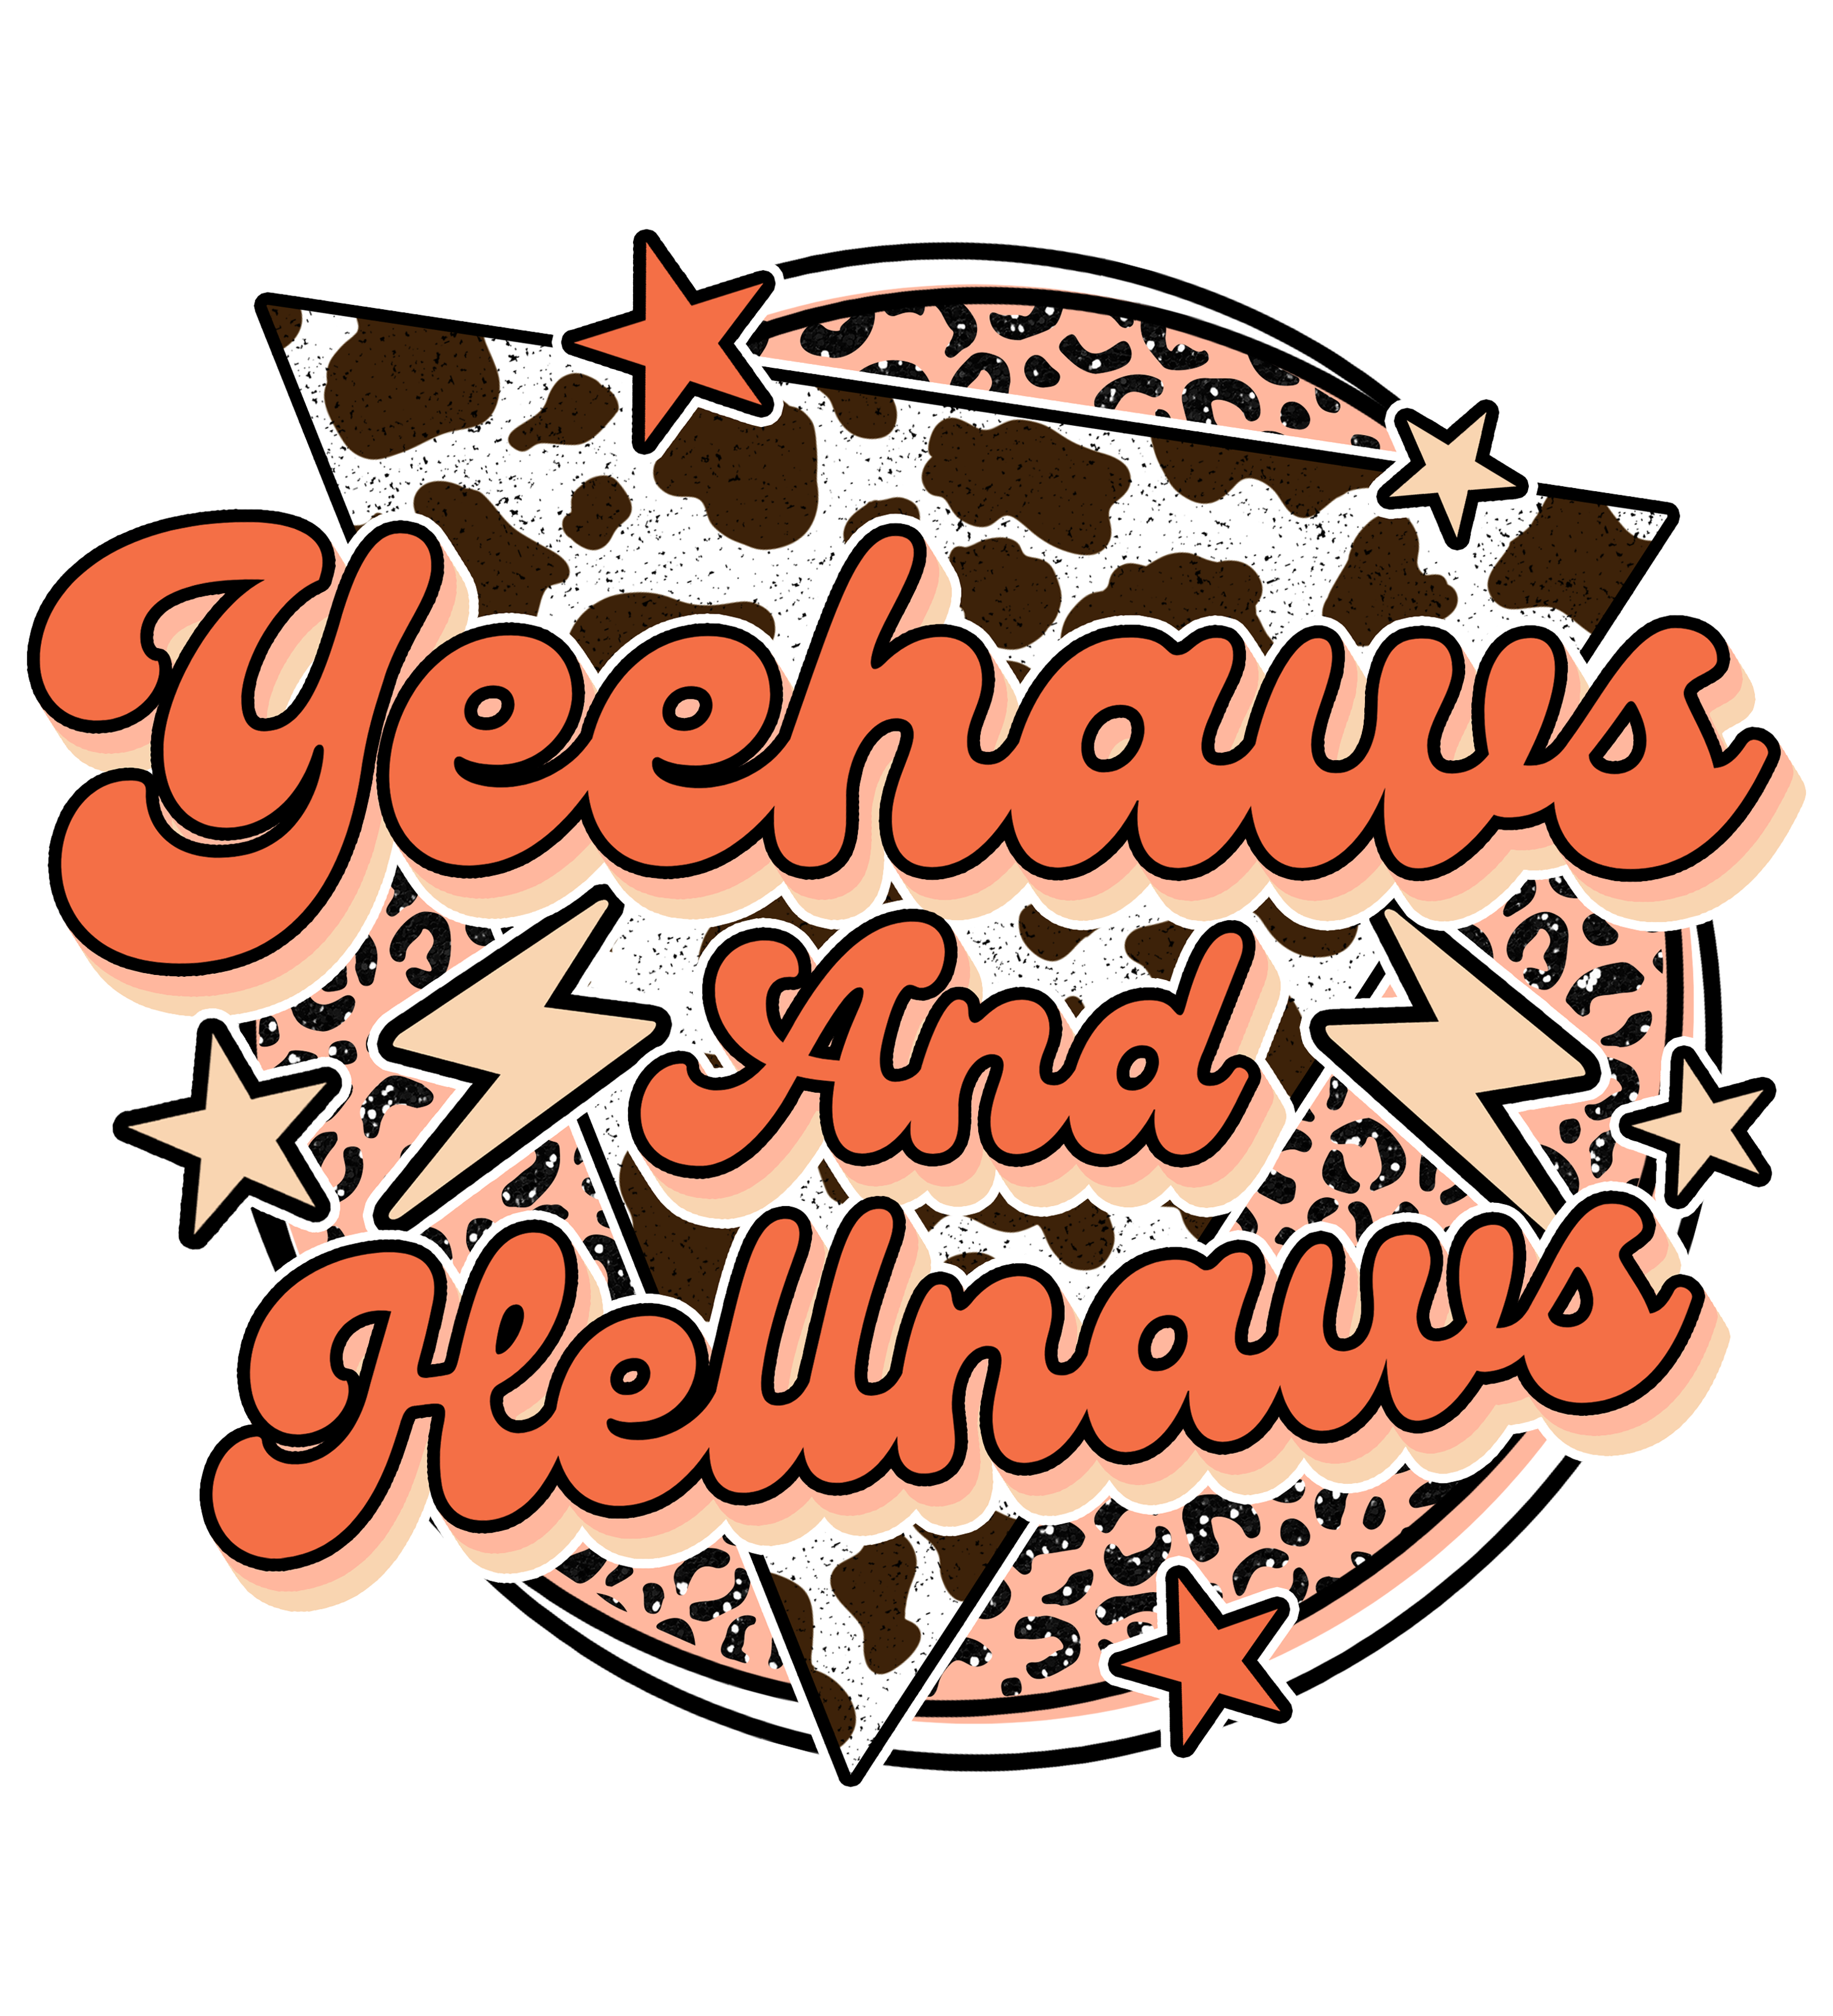 Sublimation Prints - Yeehaws and Hellnaws - The Vinyl Haus